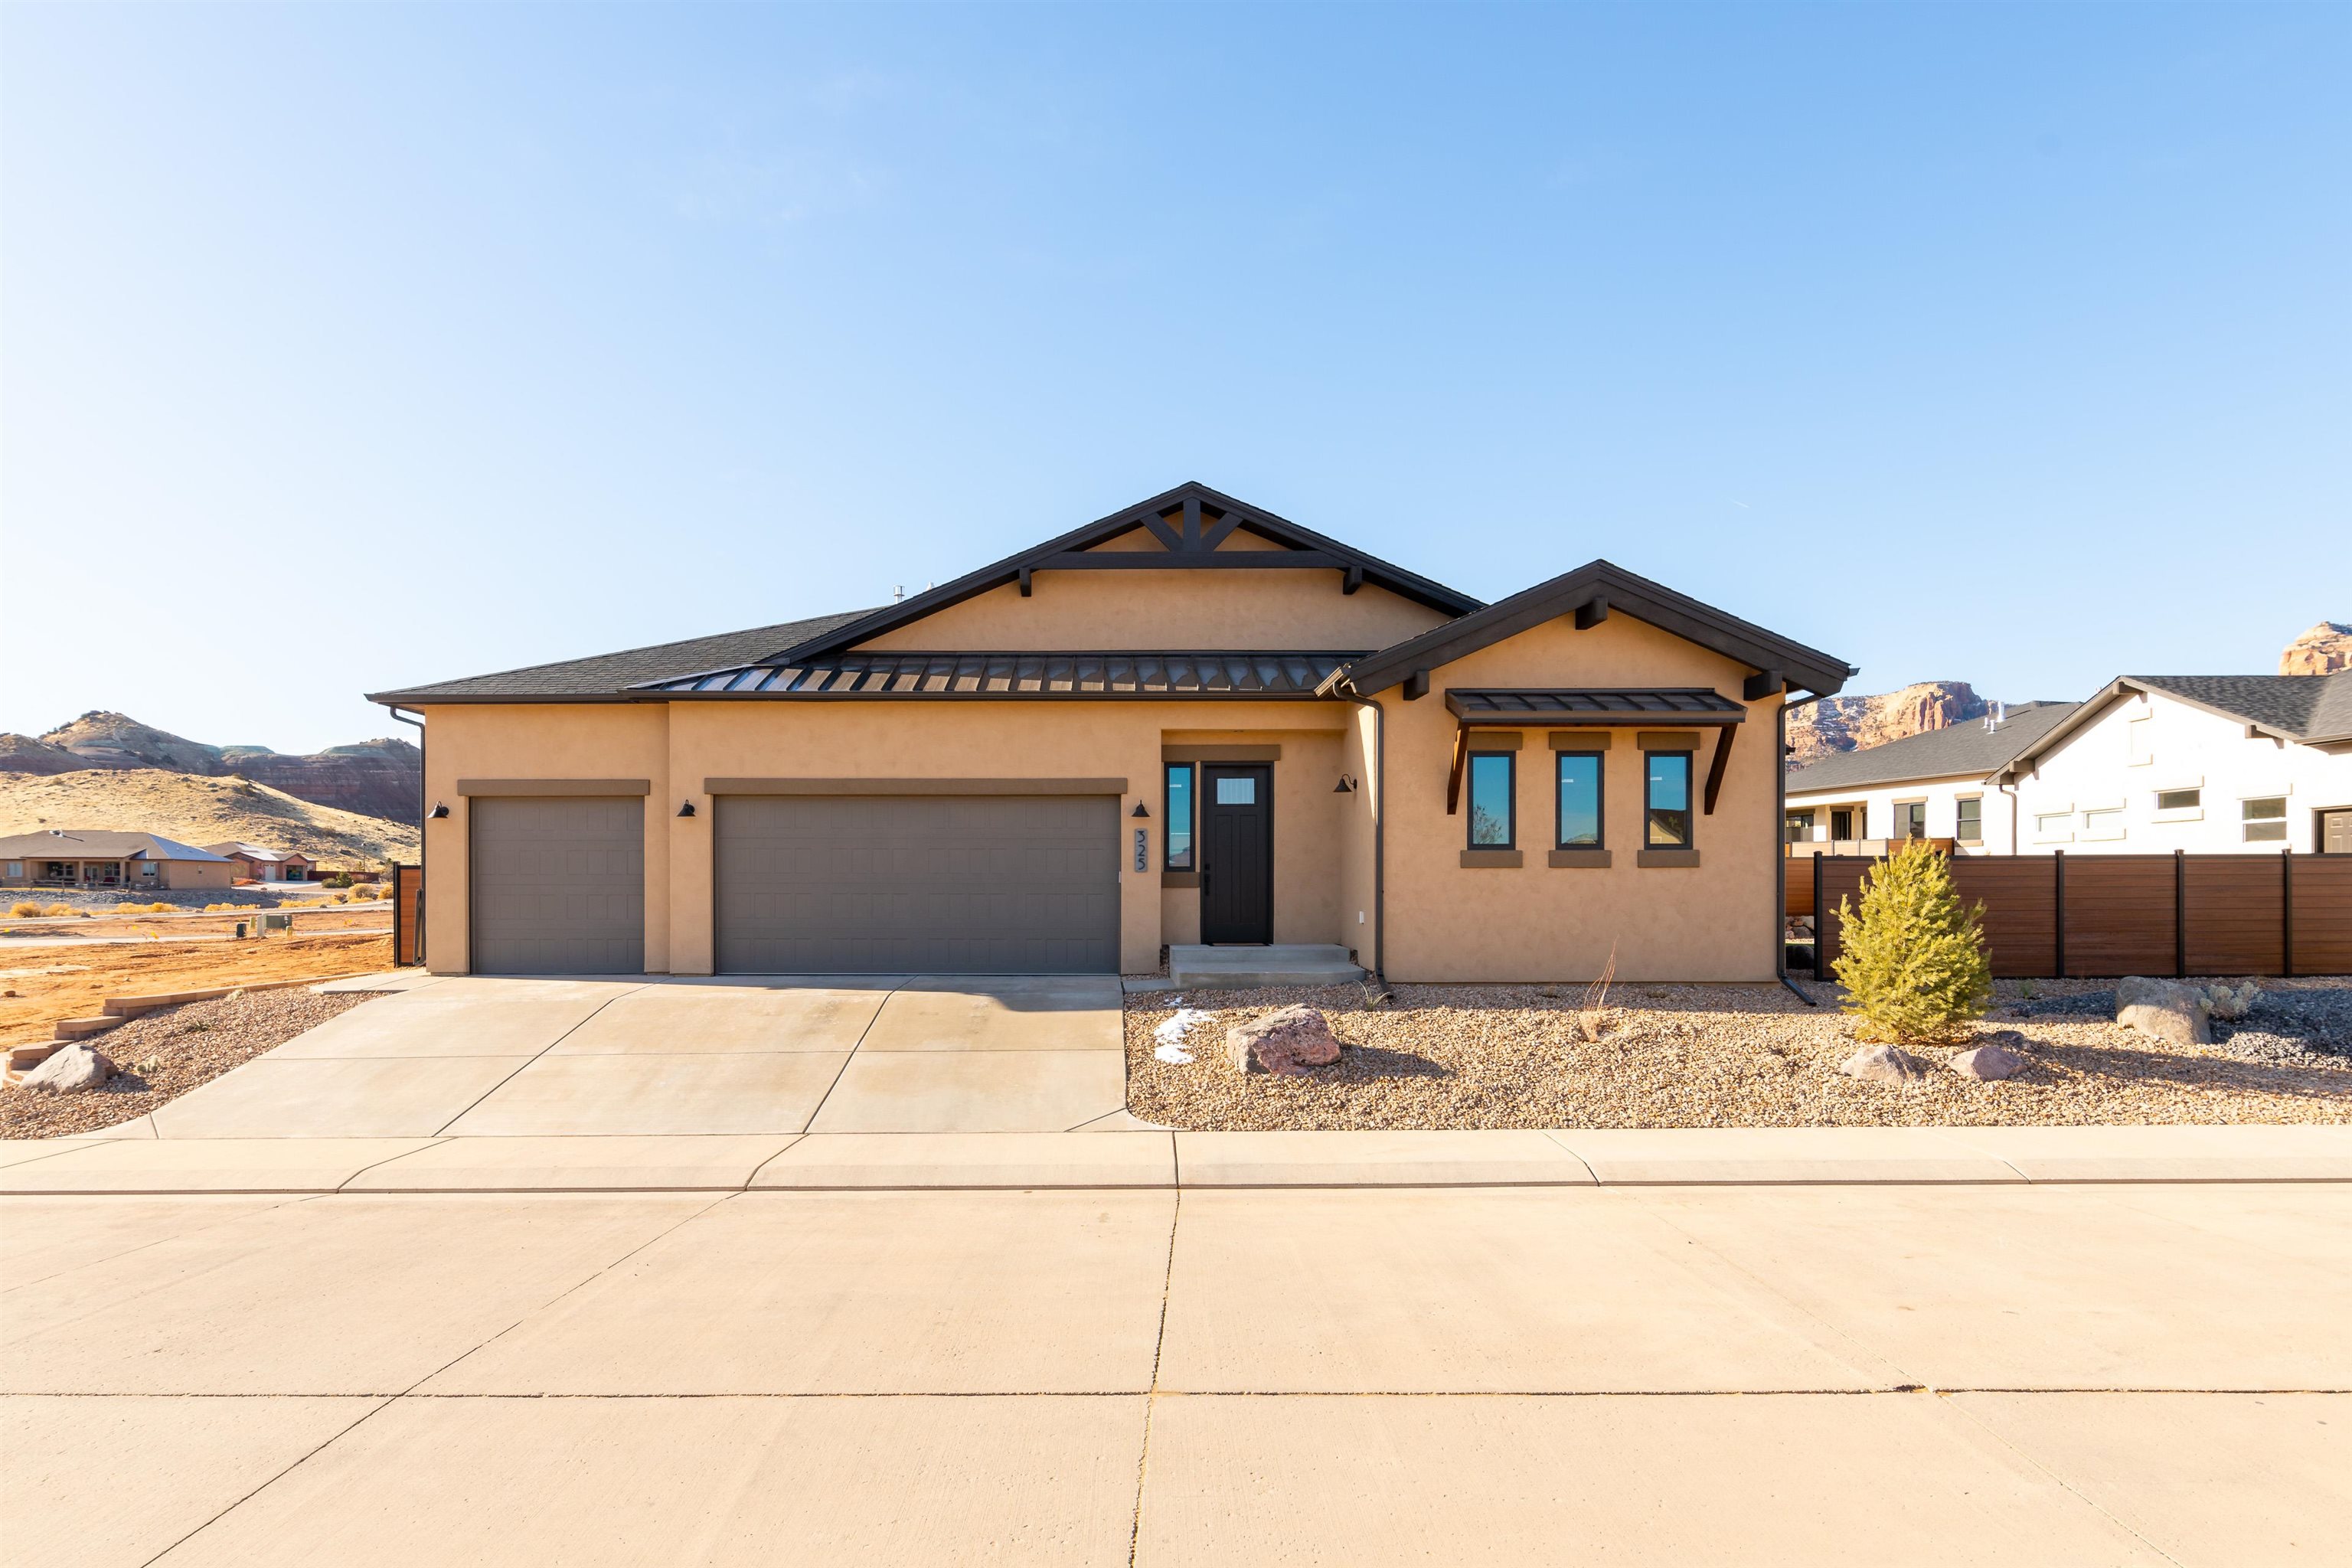 Another beauty brought to you by Conquest Construction.  Red Rocks Valley features stunning views and close proximity to the best of outdoor life in Western Colorado, plus it's a quick 5 minute drive to downtown GJ.  Inside you'll find vaulted ceilings, rustic wood beams, gorgeous flooring and finishes throughout with Andersen Windows installed to capture the views out every window. High desert landscaping and custom fencing is included! Book your private showing today!